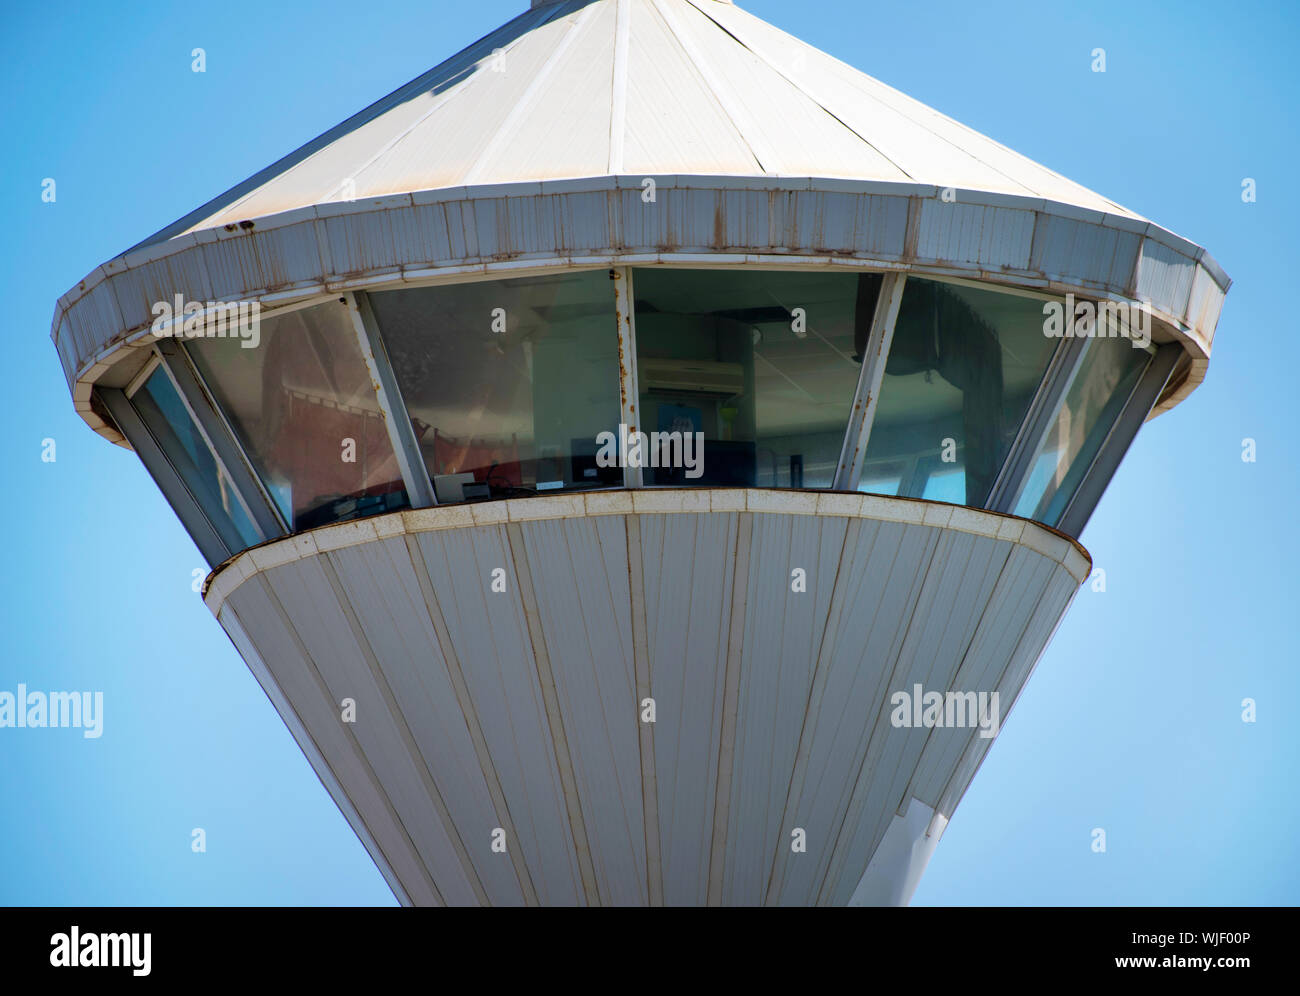 Vigilance tower to control departures and arrivals at the airport. Port or harbor tower of control or vigilance against a clear blue sky in Spain 2019. Stock Photo